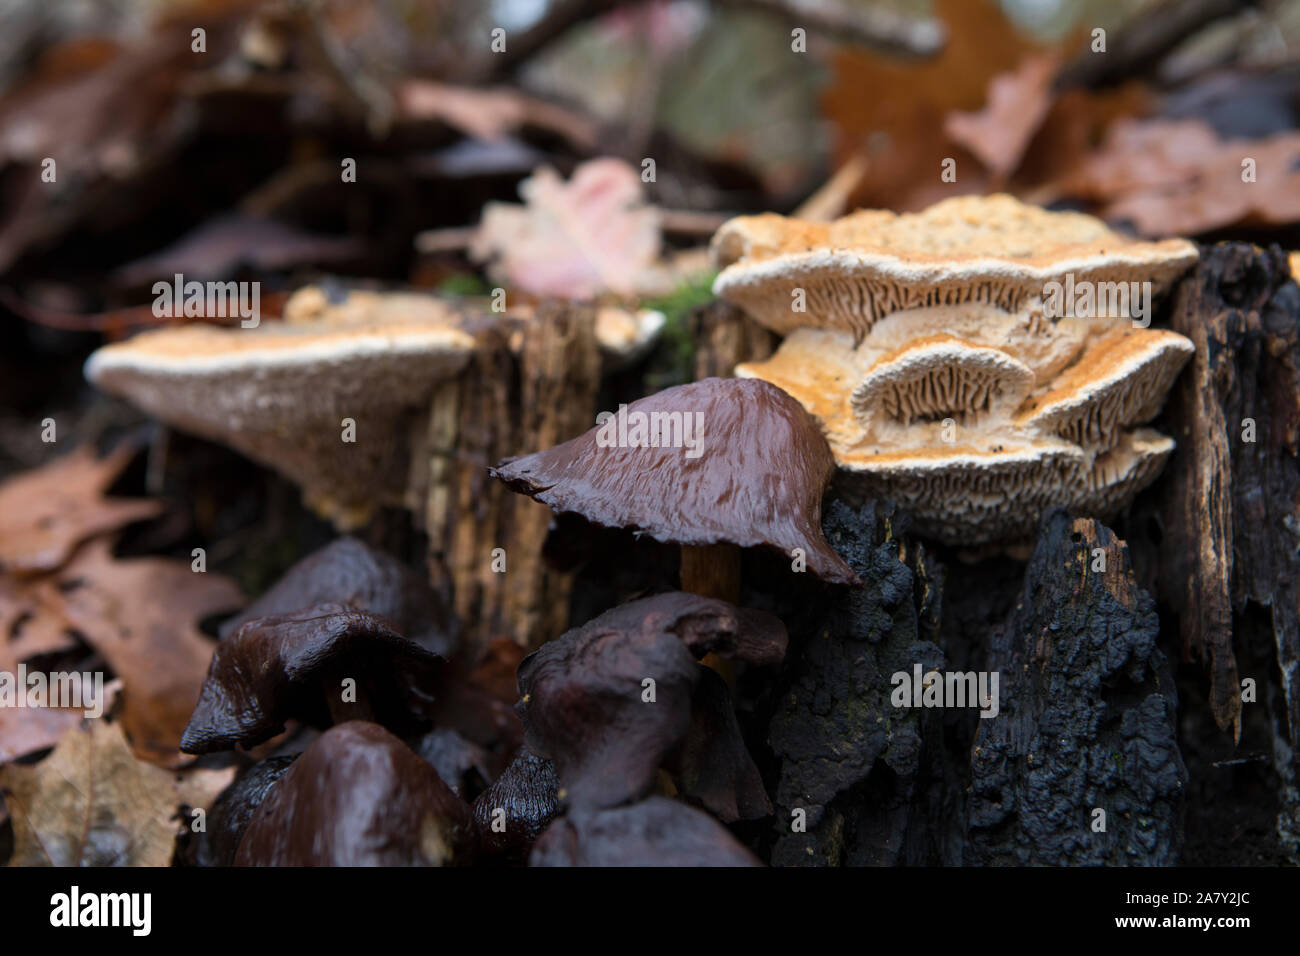 Fresh maze-gill fungi growing on a stump of oak wood and old sulphur tuft mushrooms in the Netherlands Stock Photo